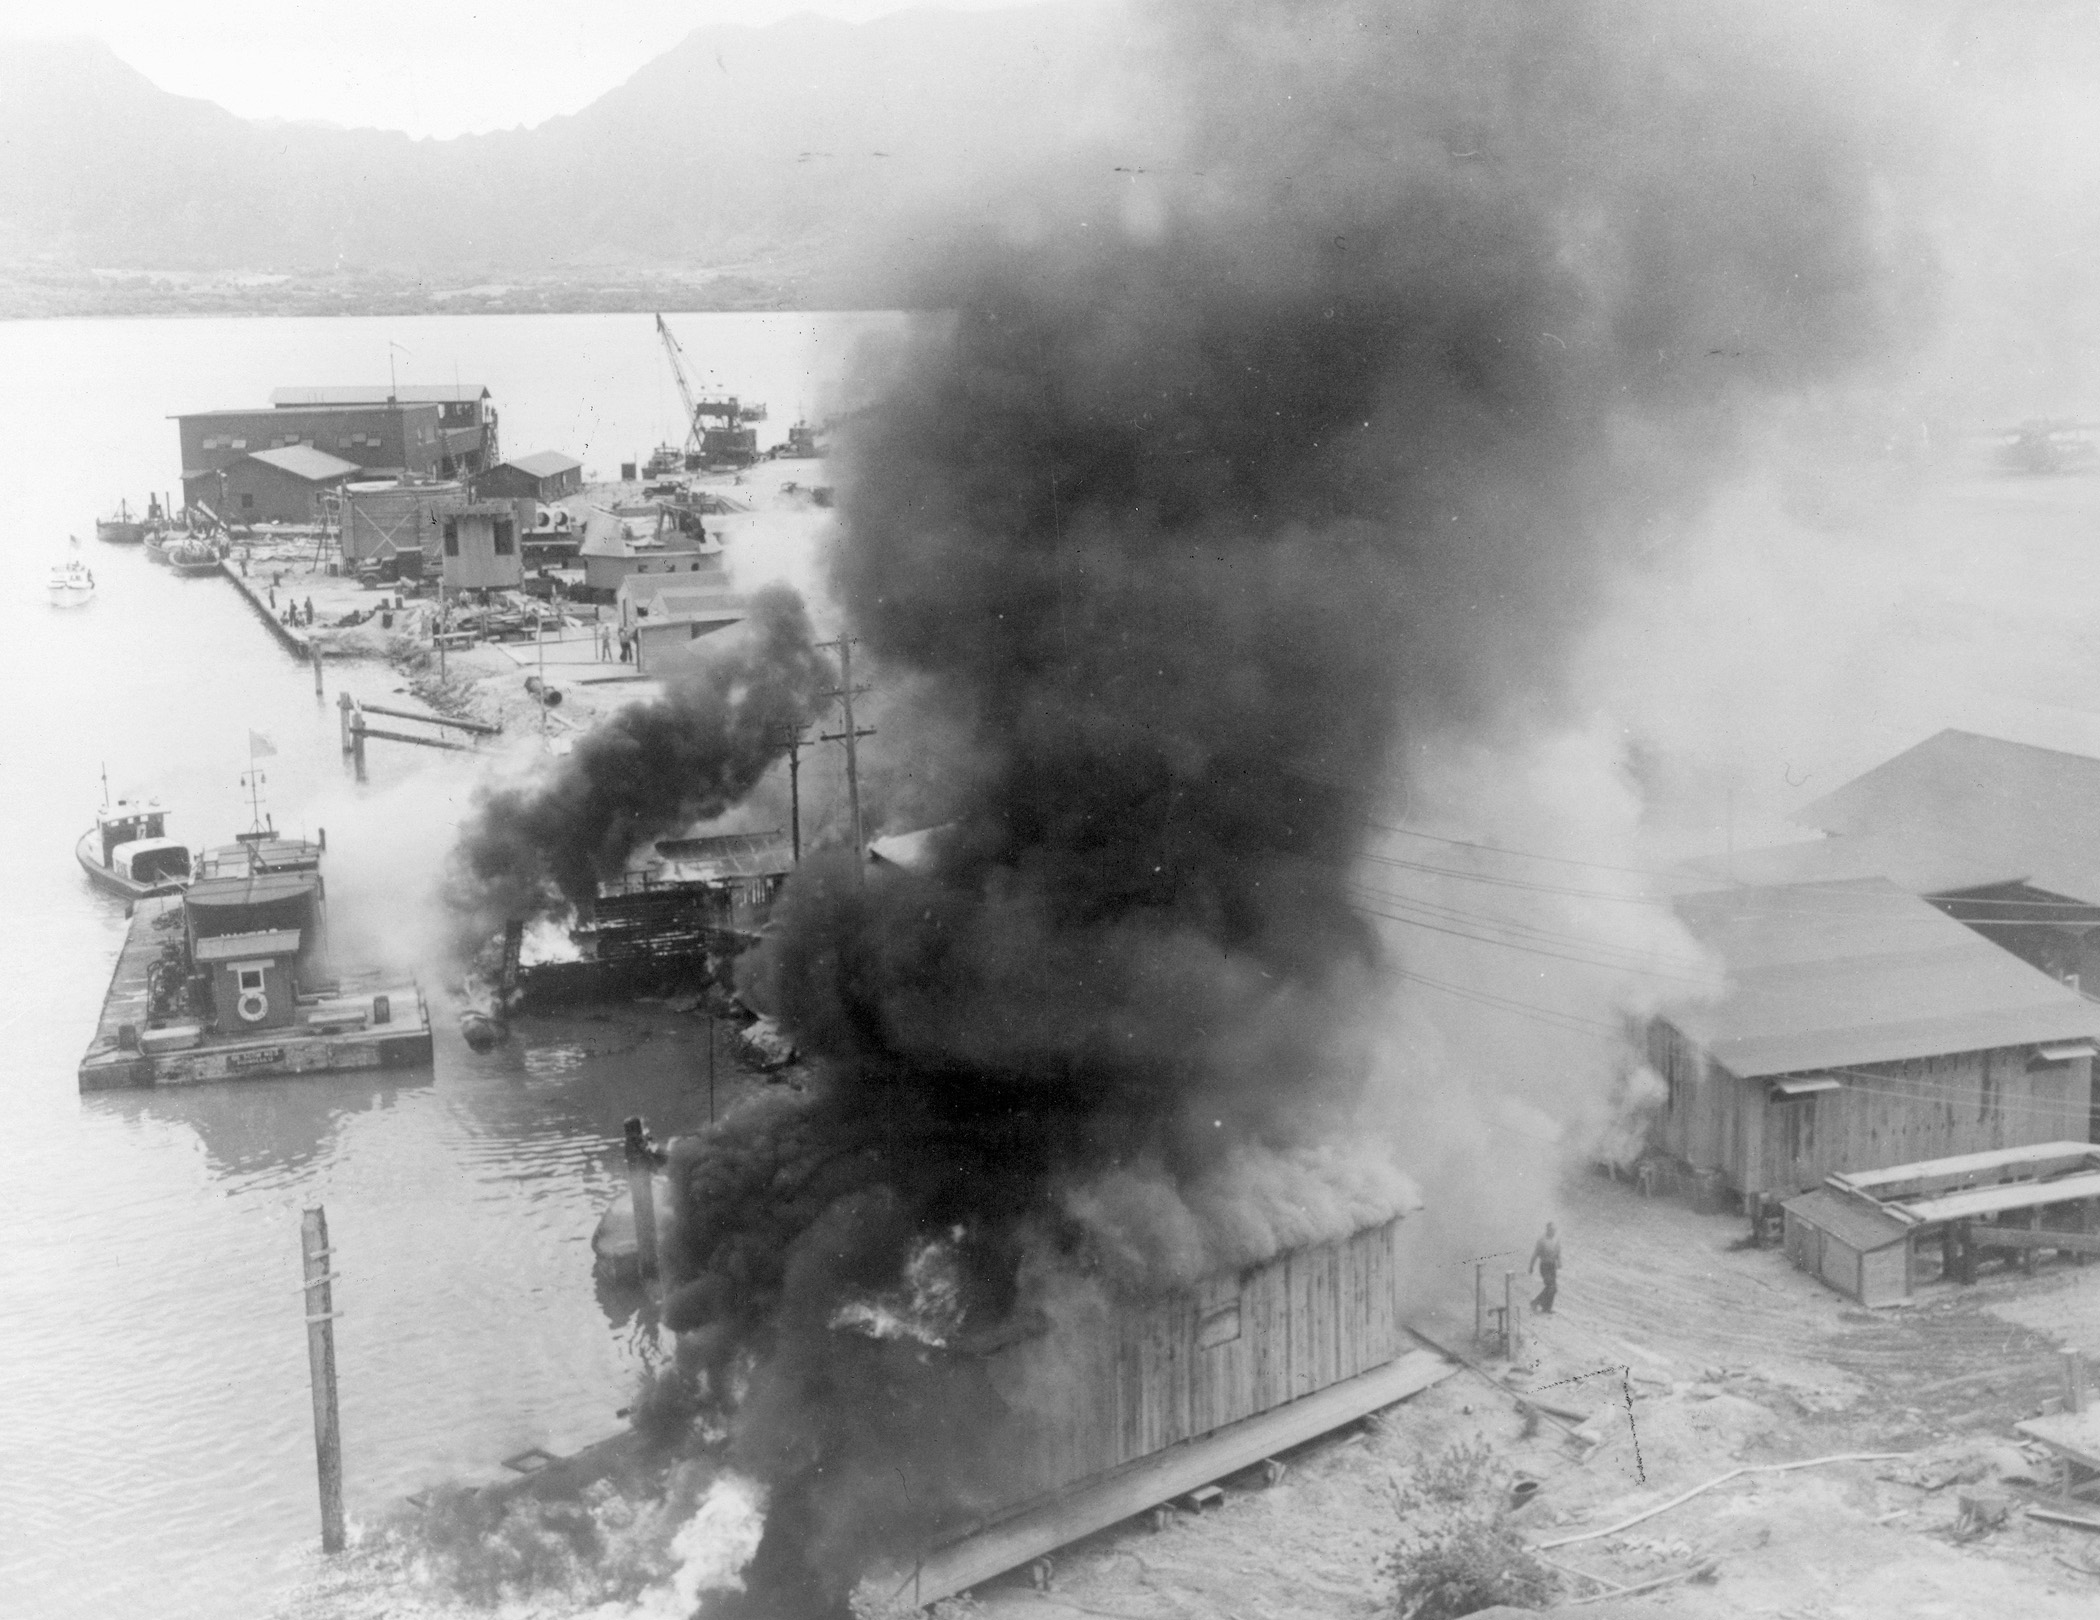 Shore installations belch smoke and flame after being bombed and strafed by Japanese aircraft. This photo of the damage at Pearl Harbor is believed to be previously unpublished.